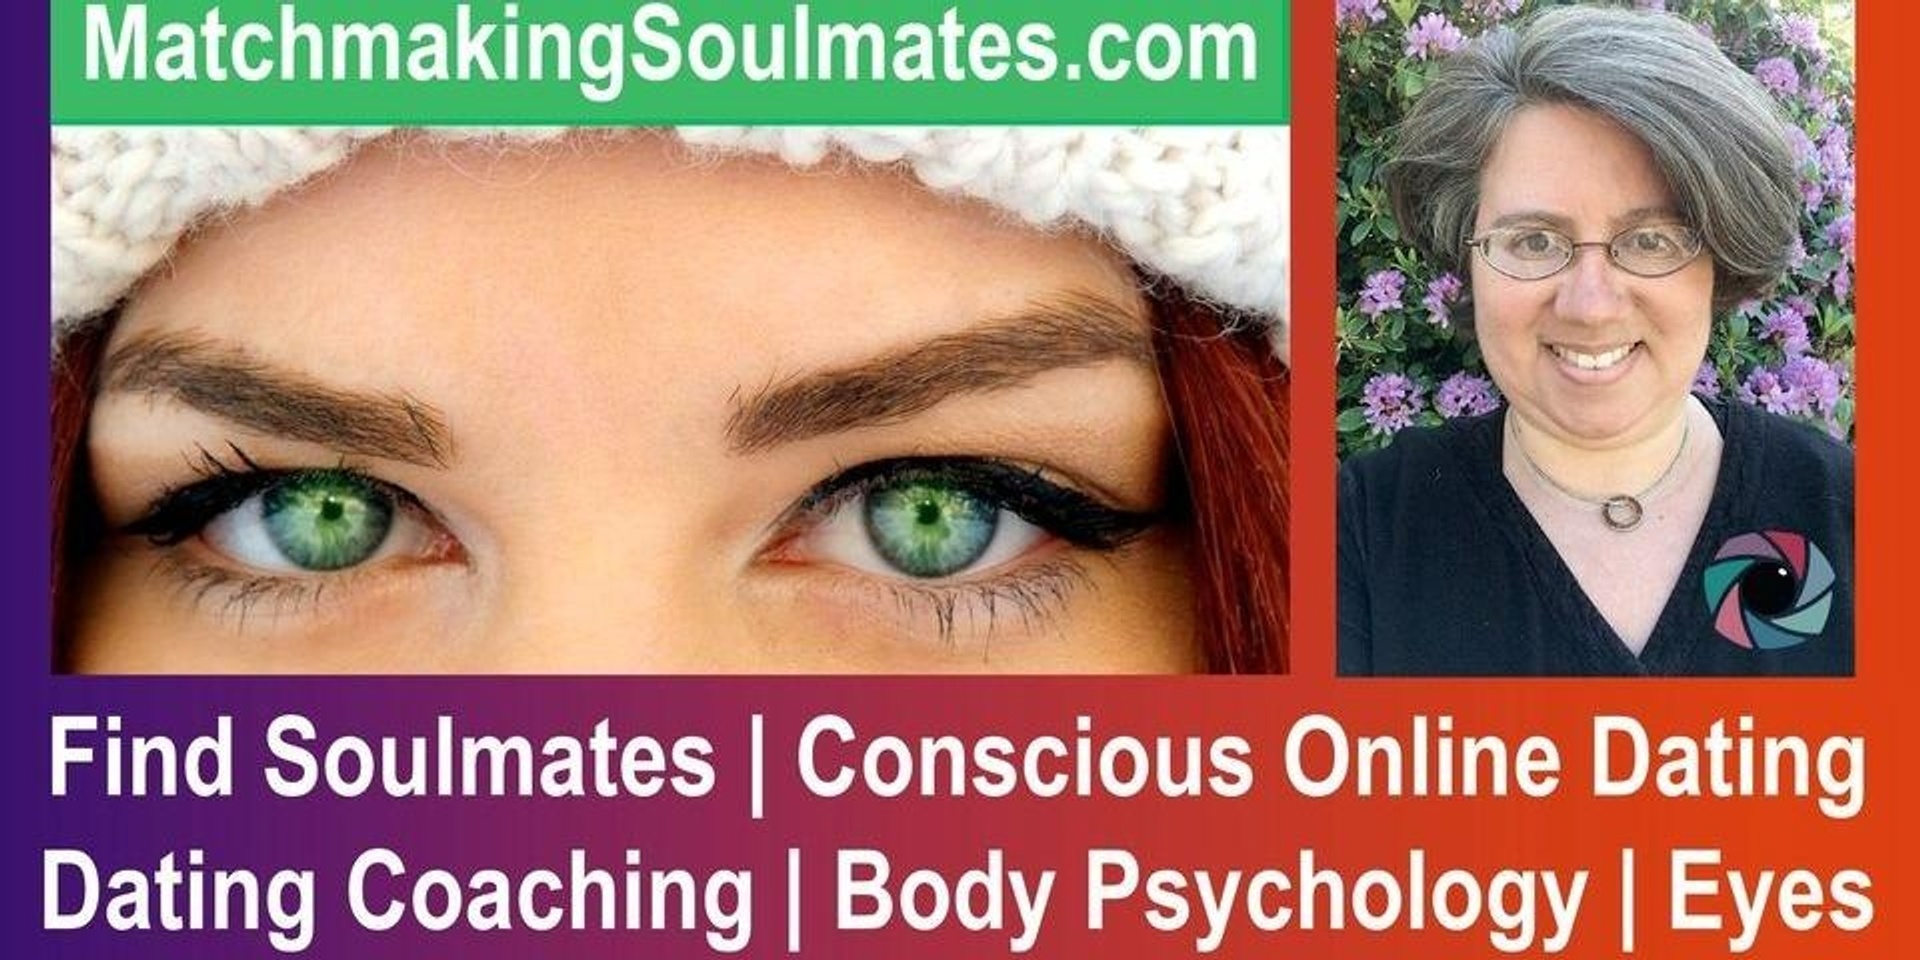 Spirituality + Online Dating (w/Intuitive Eye Readings) Partner Event by MeWe Fairs + Awkwardly Zen